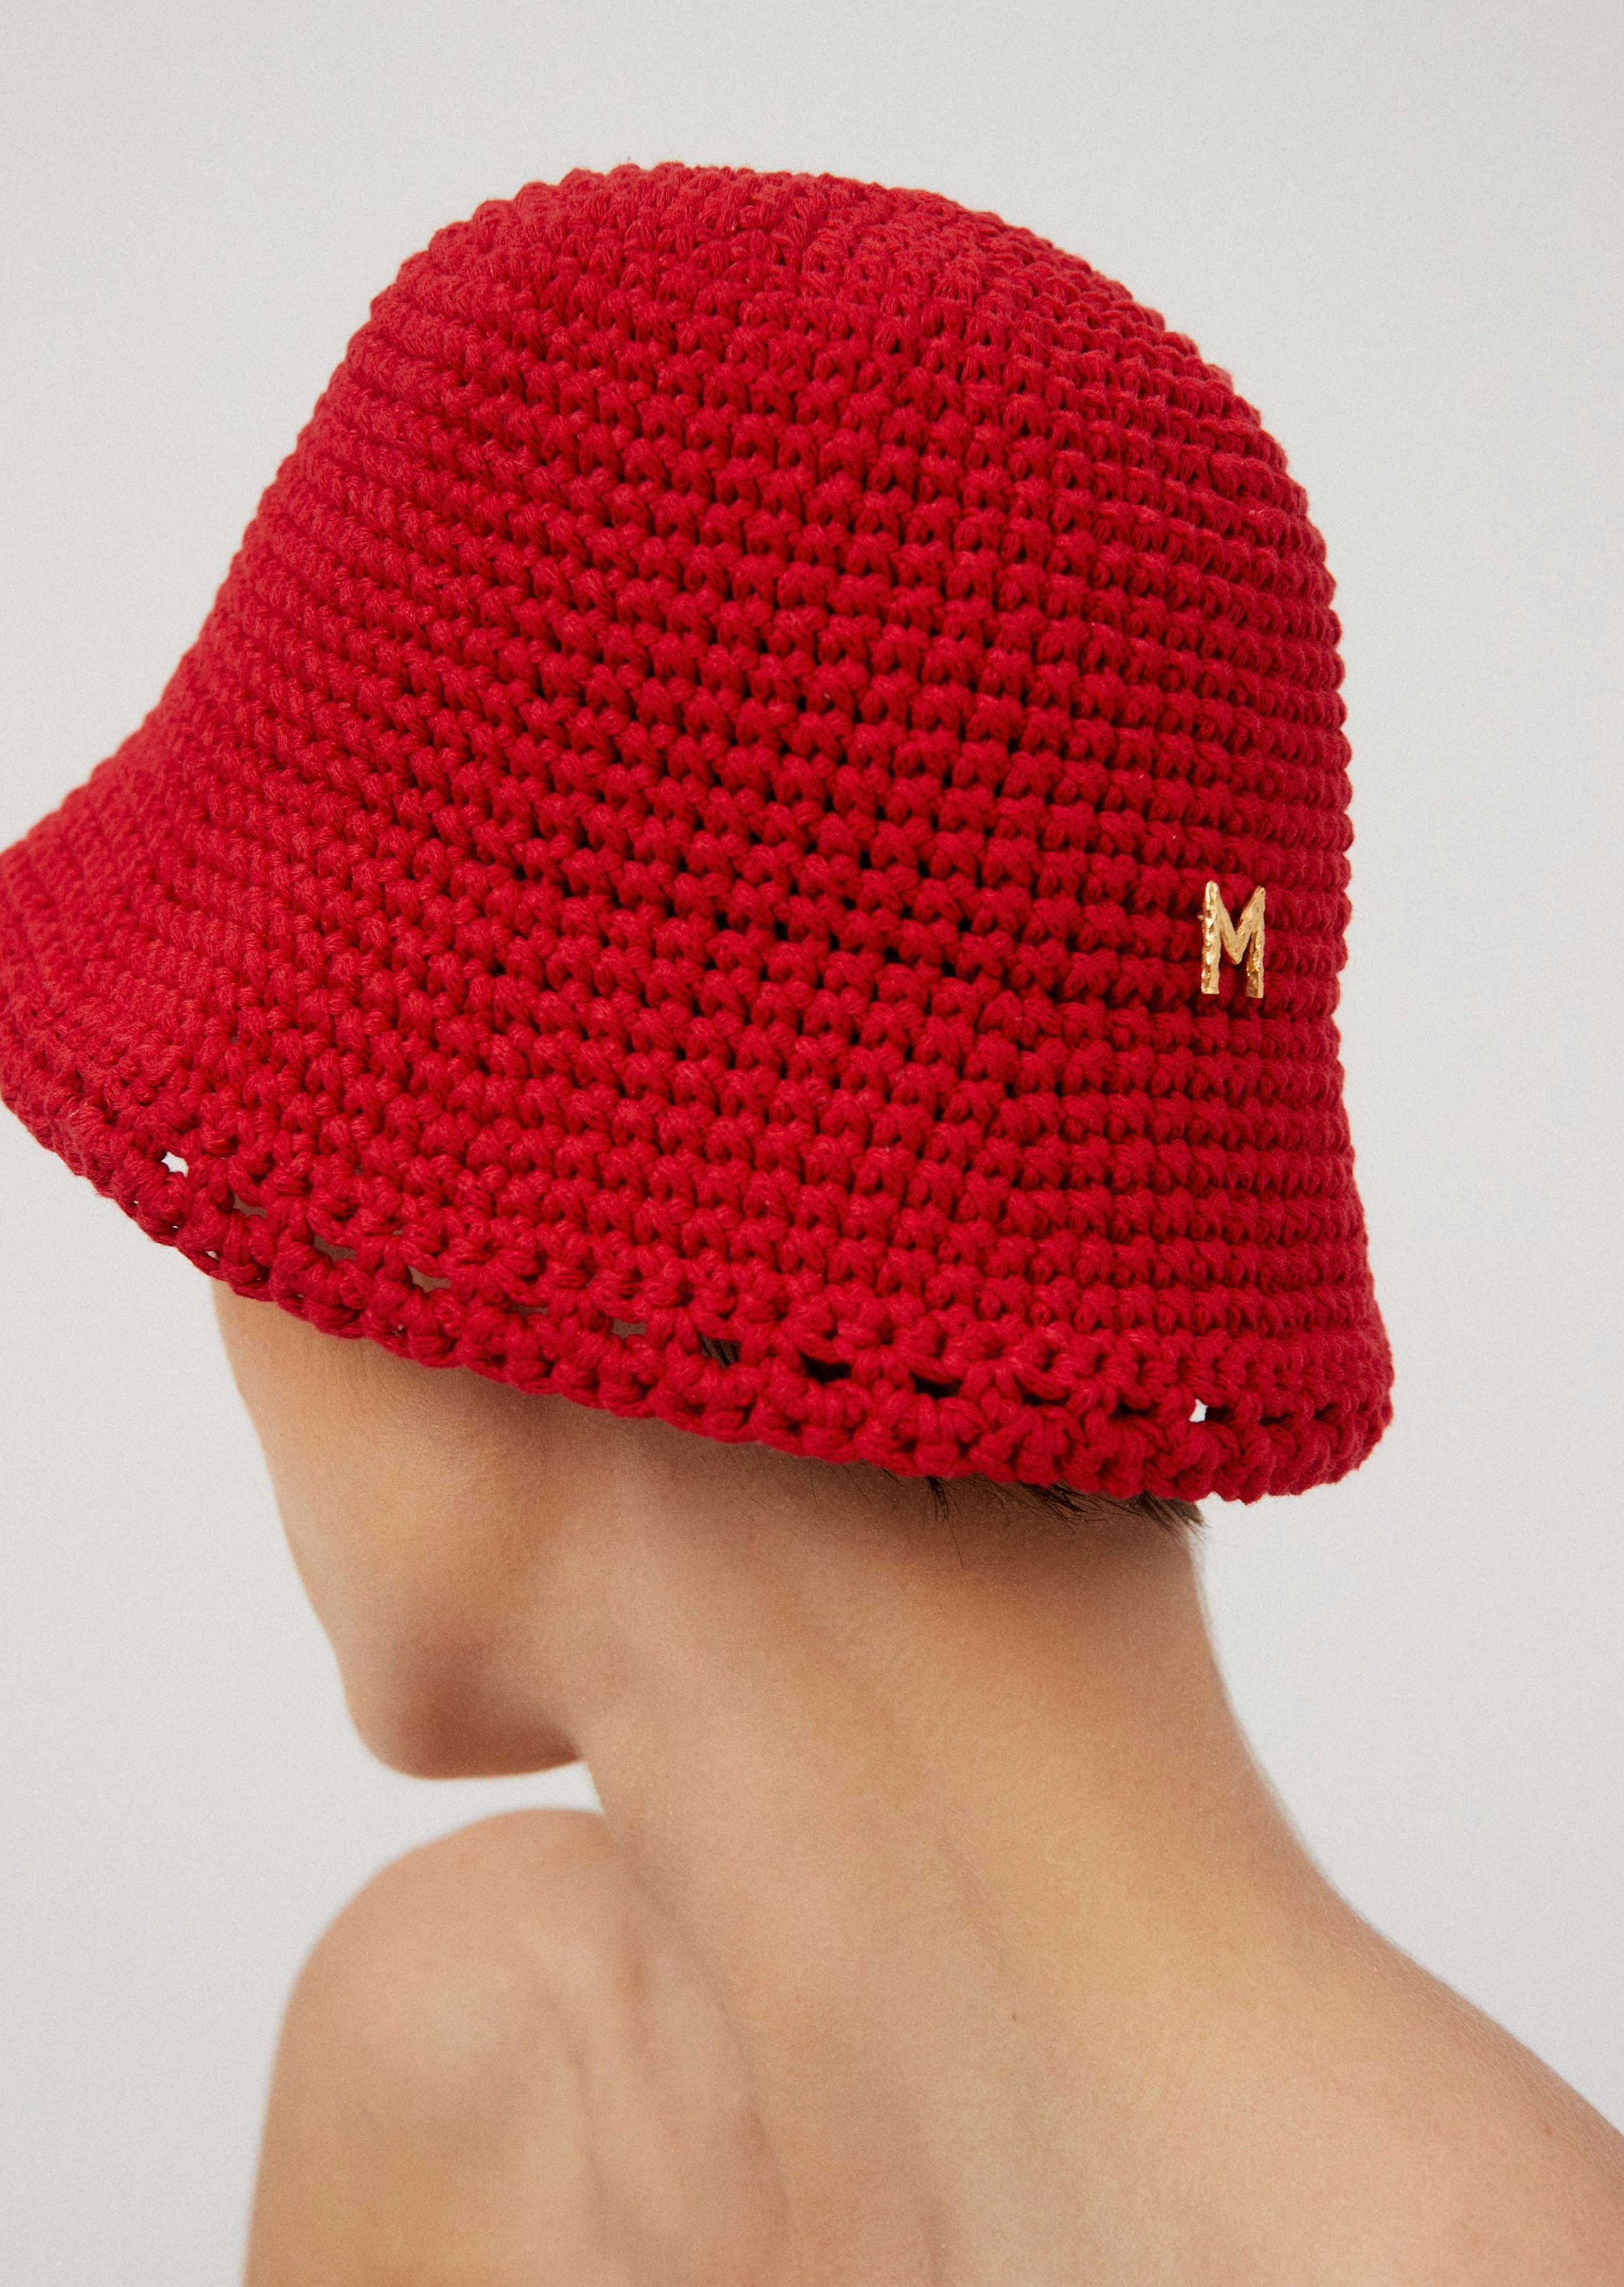 SS22 HAT 01 RED